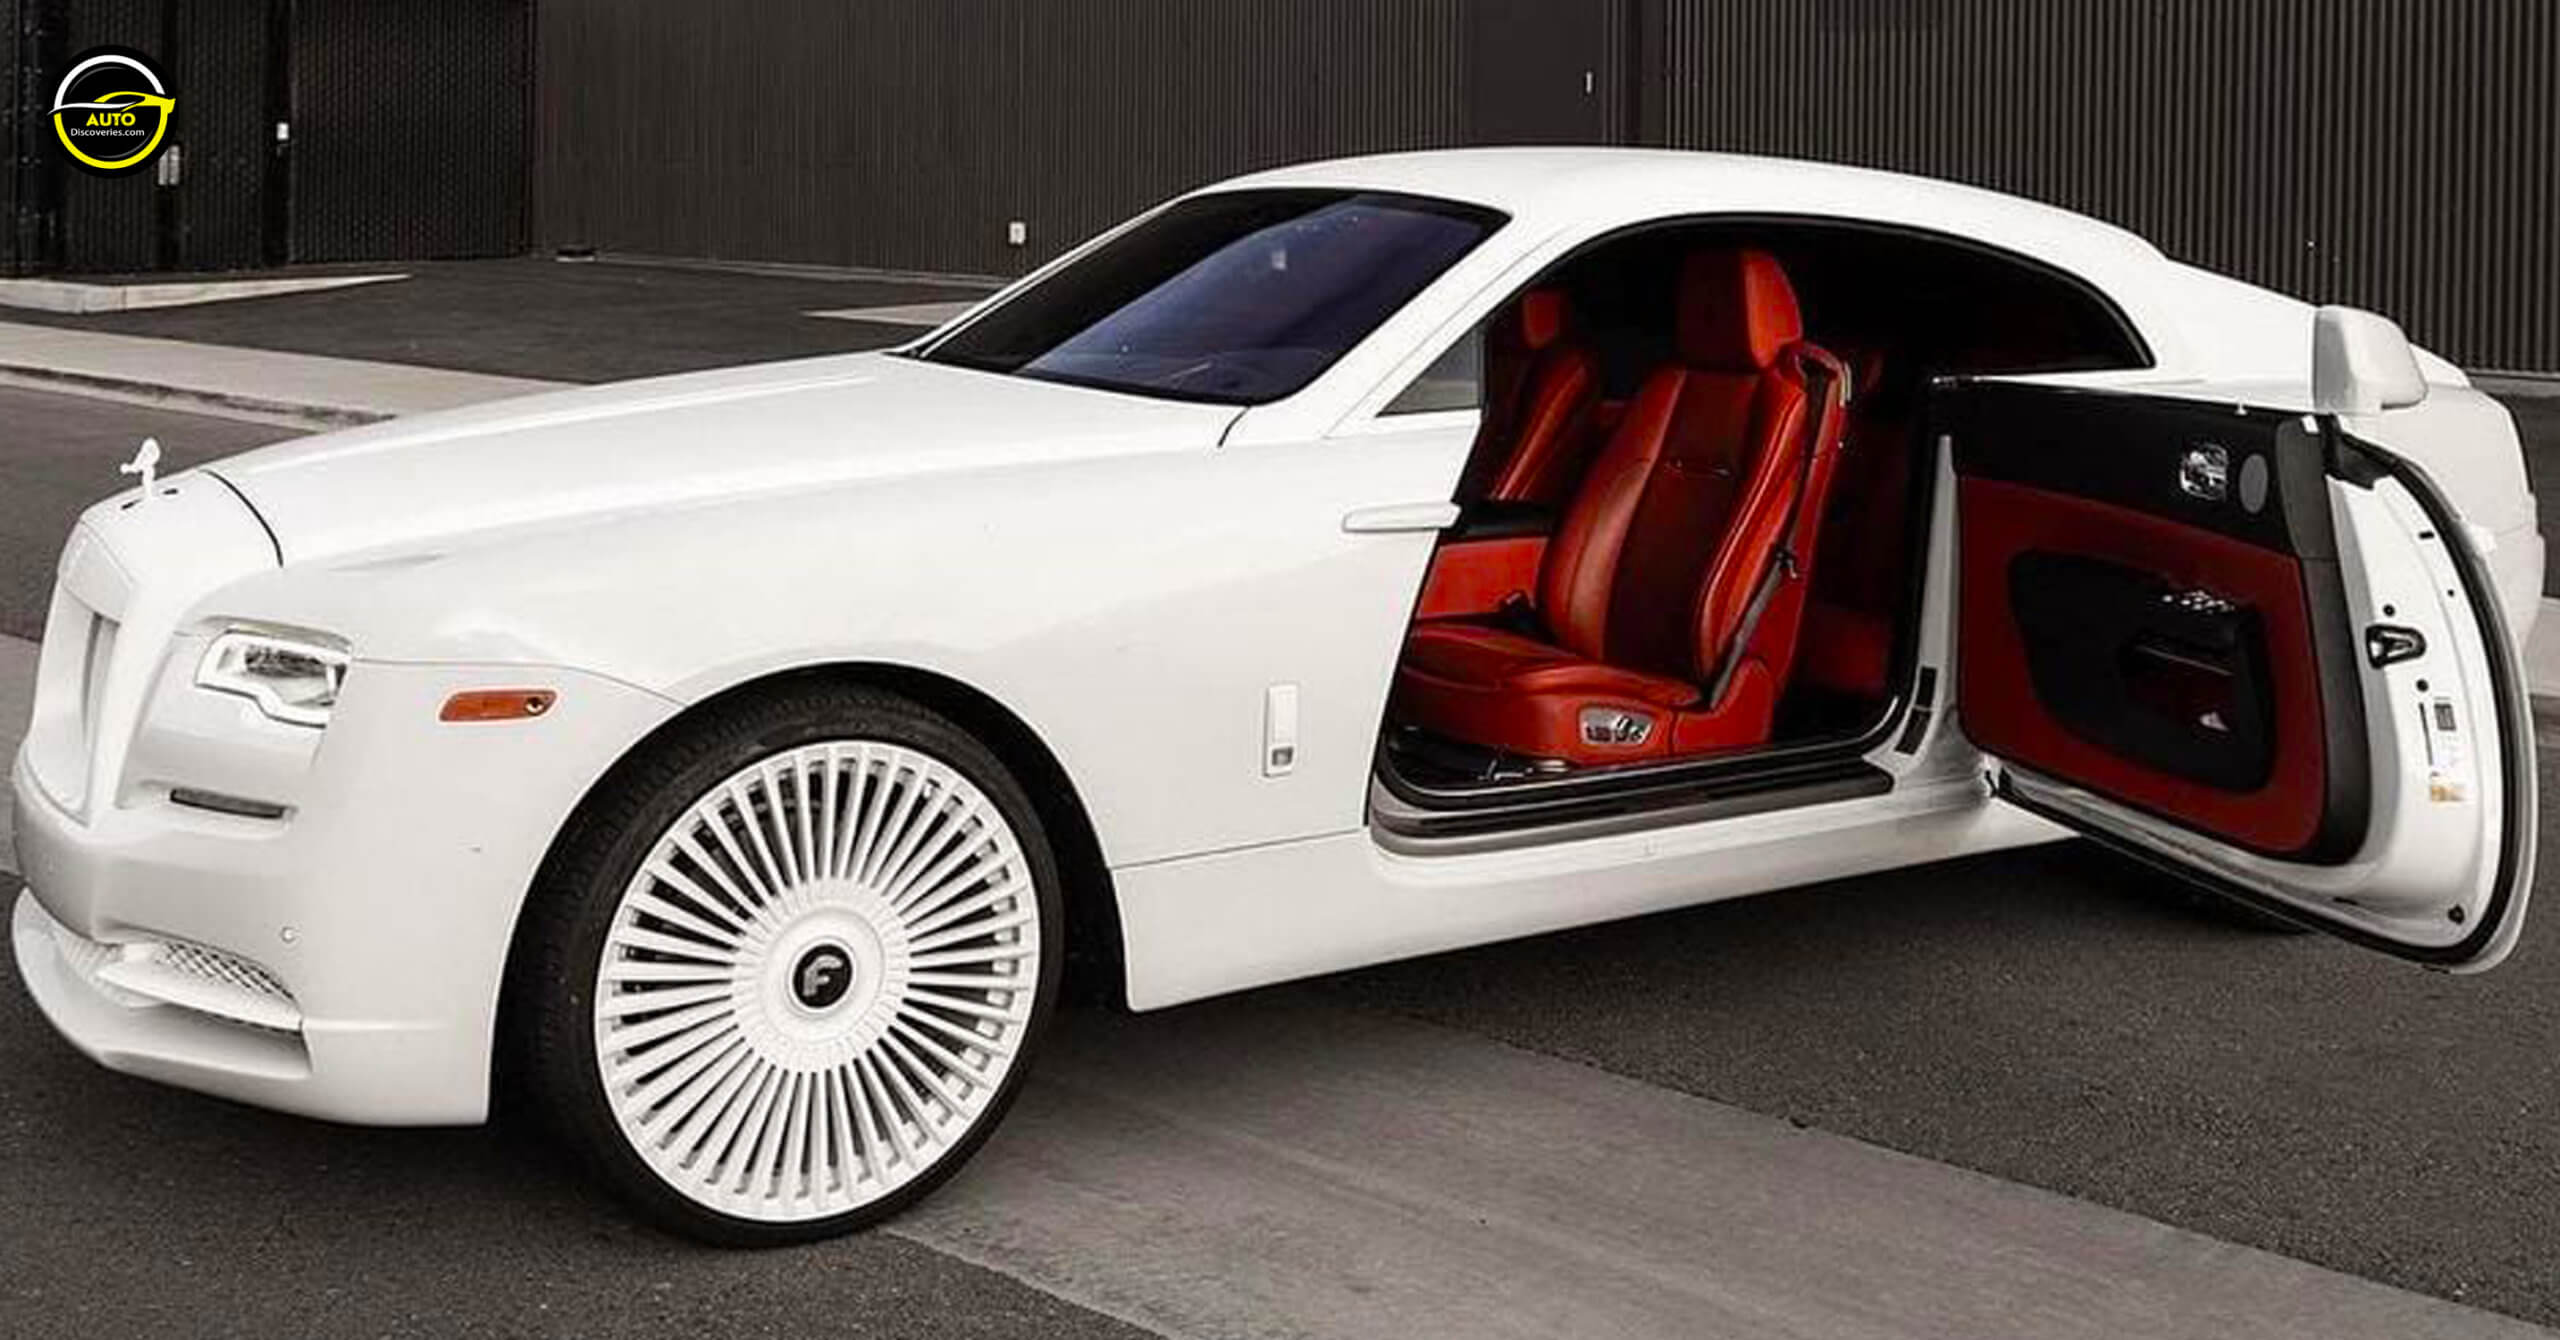 Rate This Royal Red Interior Rolls Royce 1 to 100  Luxury cars rolls royce  Rolls royce cars White rolls royce